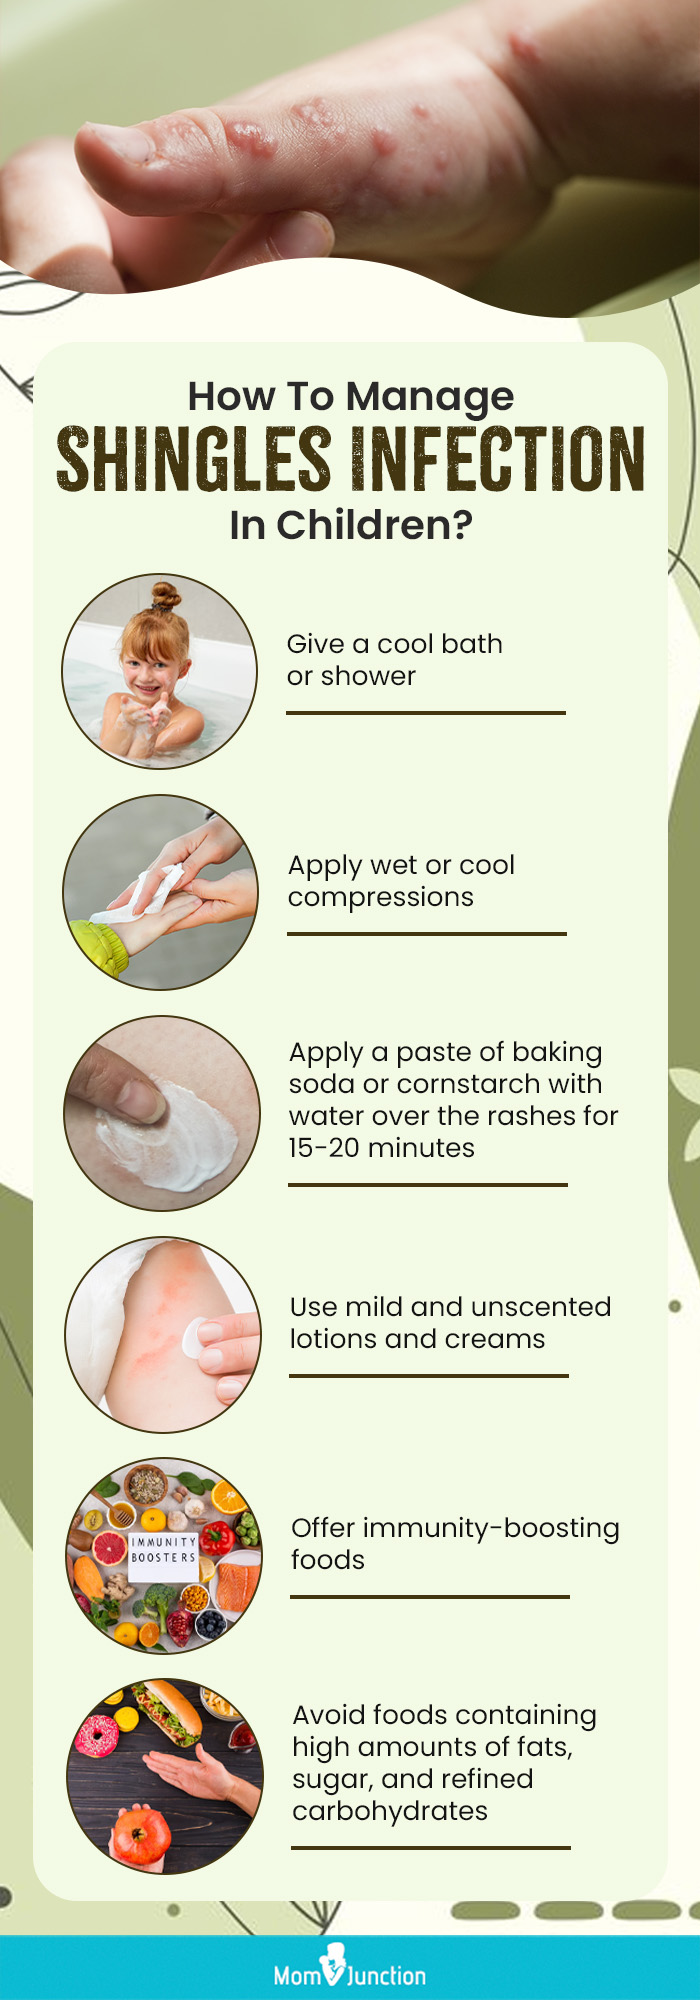 how to manage shingles infection in children (infographic)